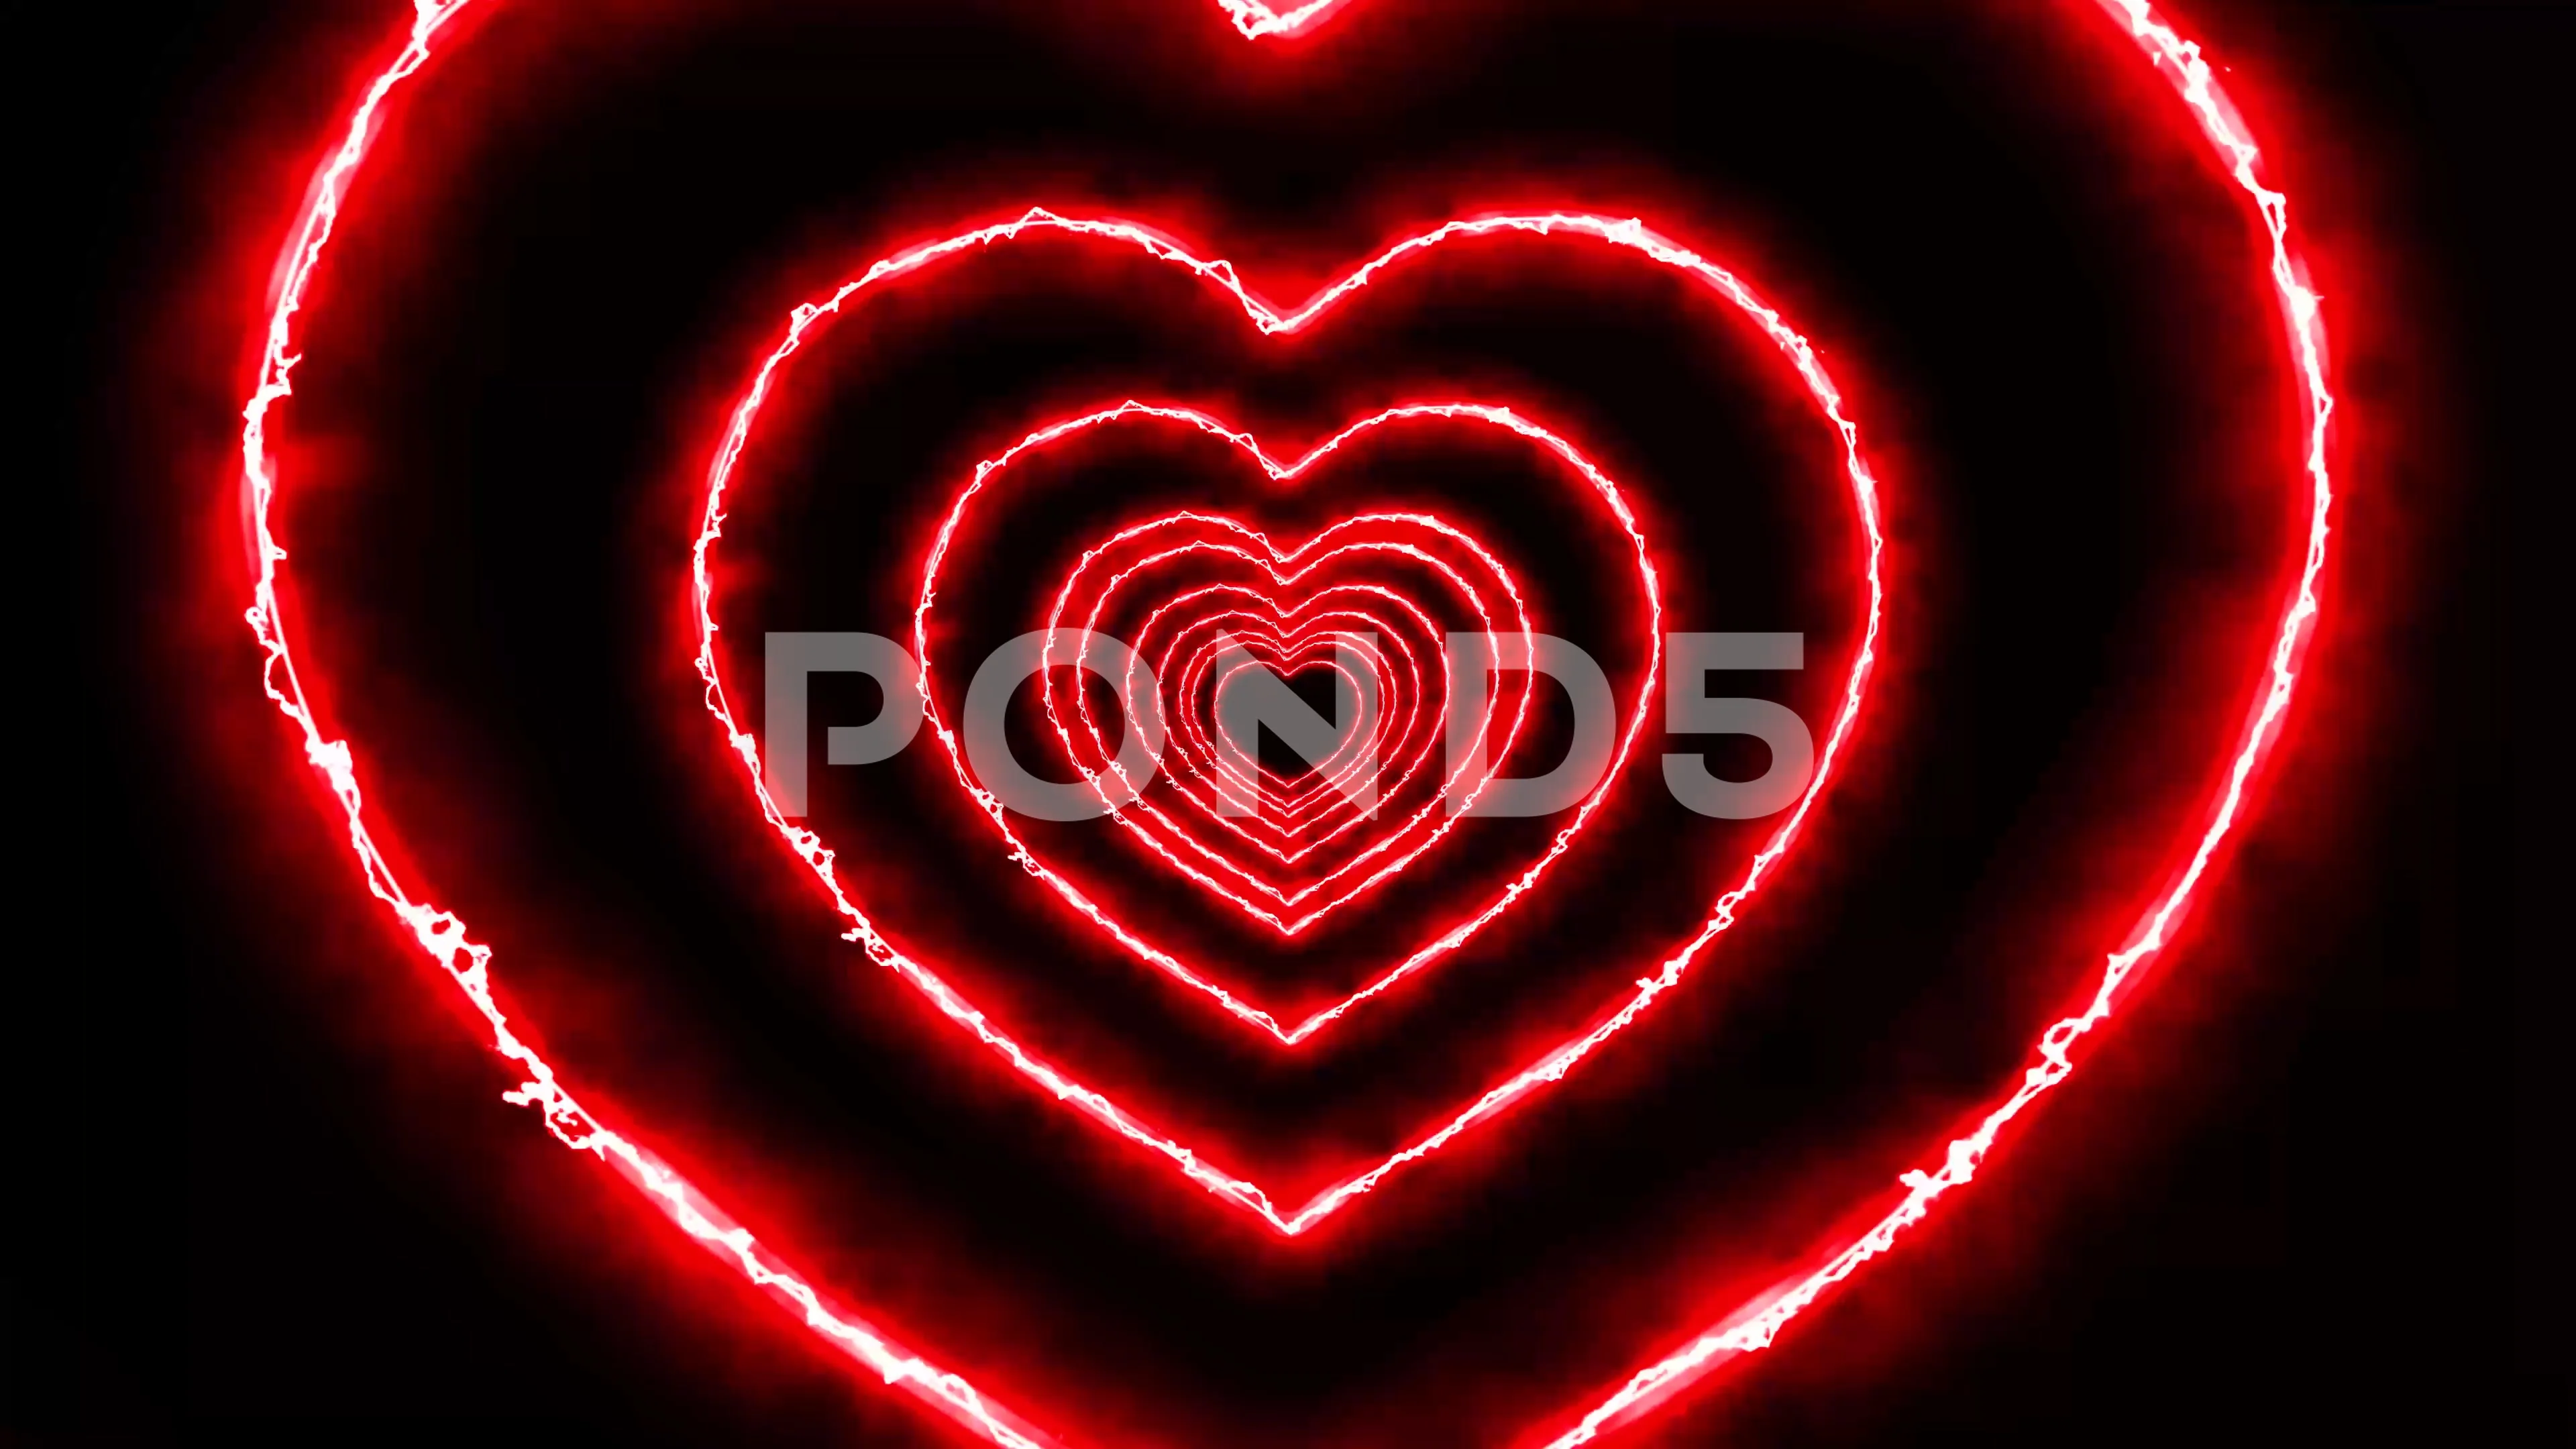 3D heart tunnel animation, red heart | Stock Video | Pond5